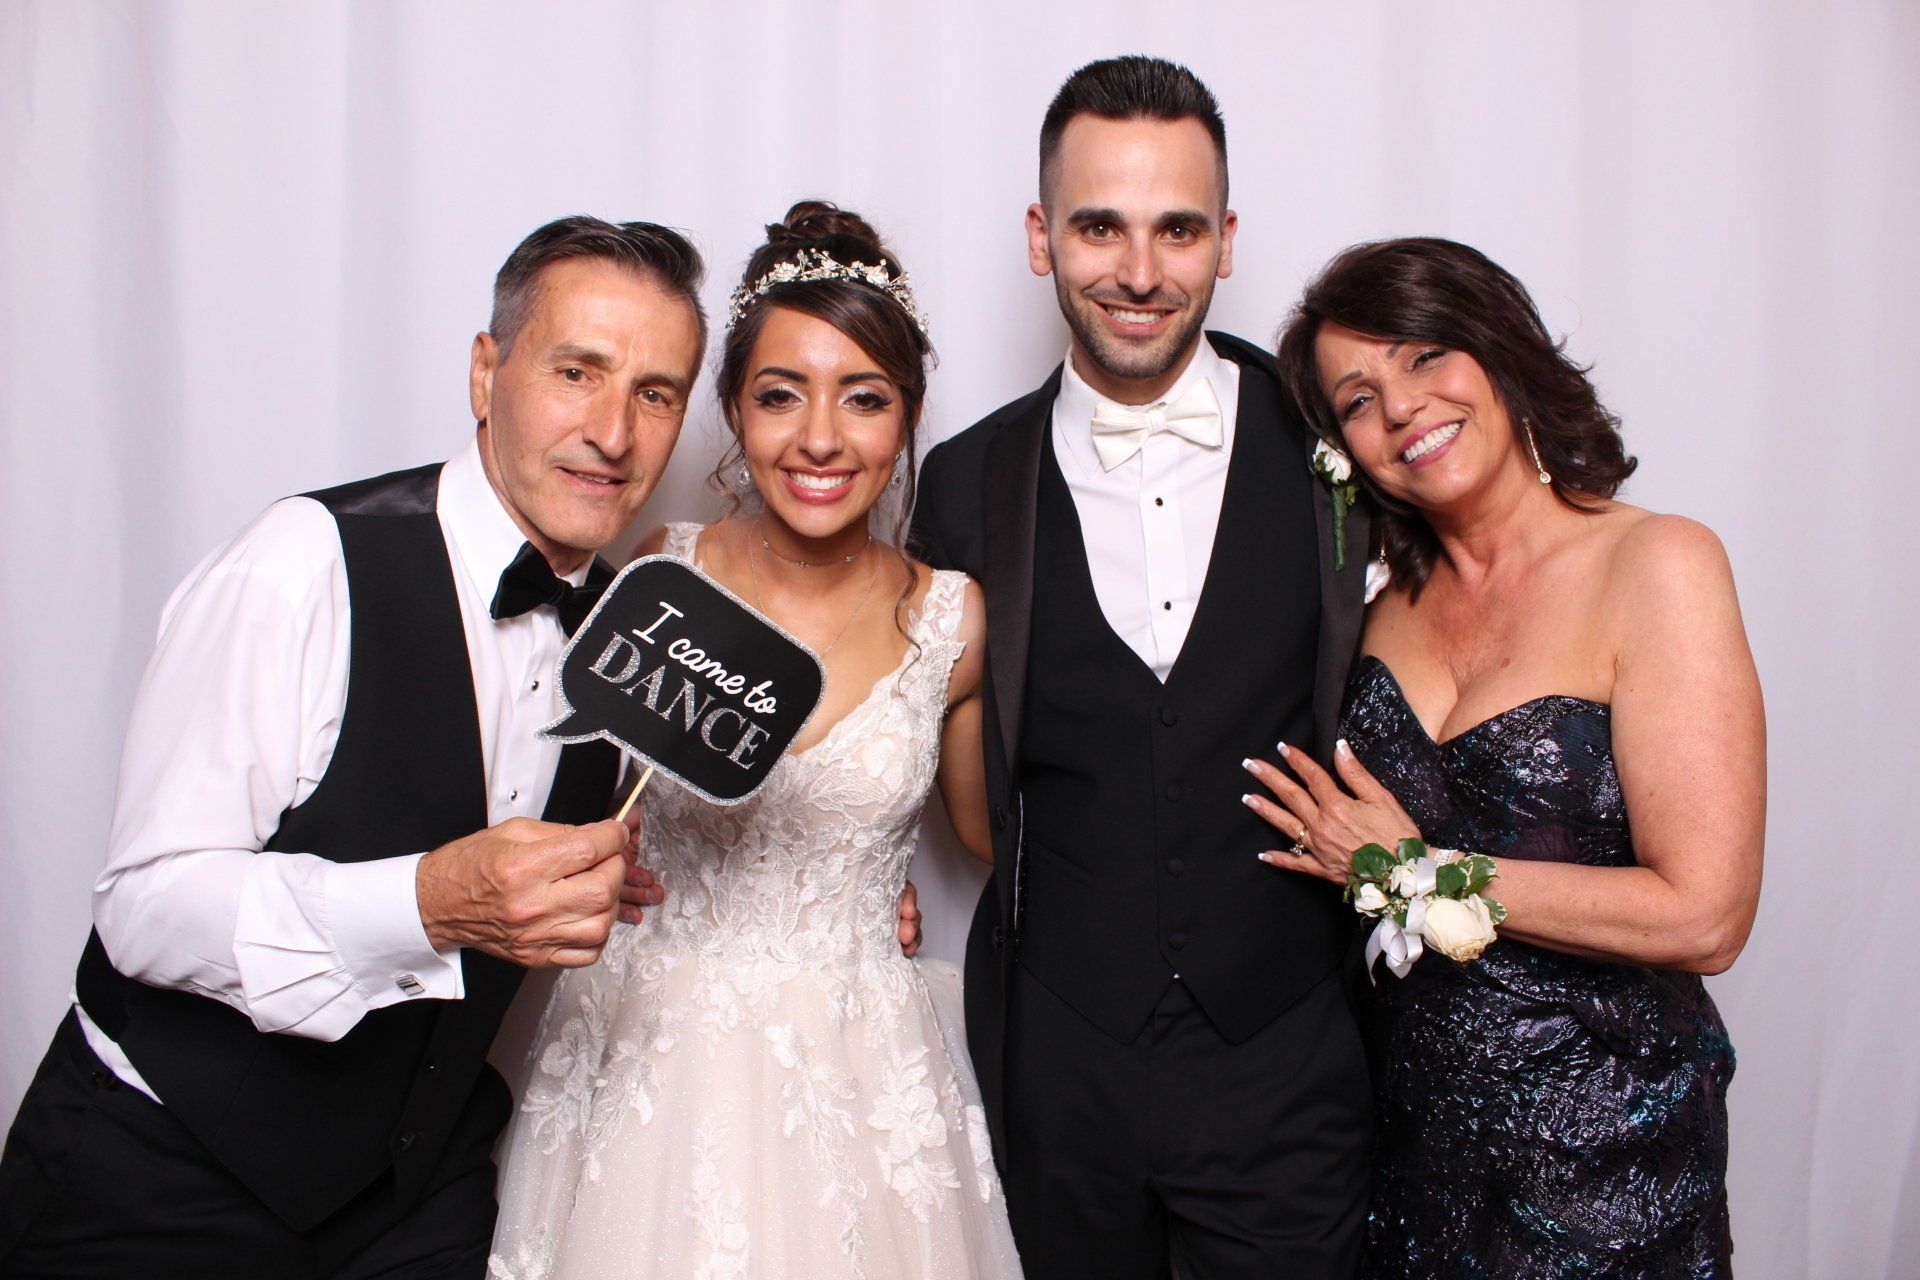 a bride and groom are posing for a picture with their parents in a photo booth.